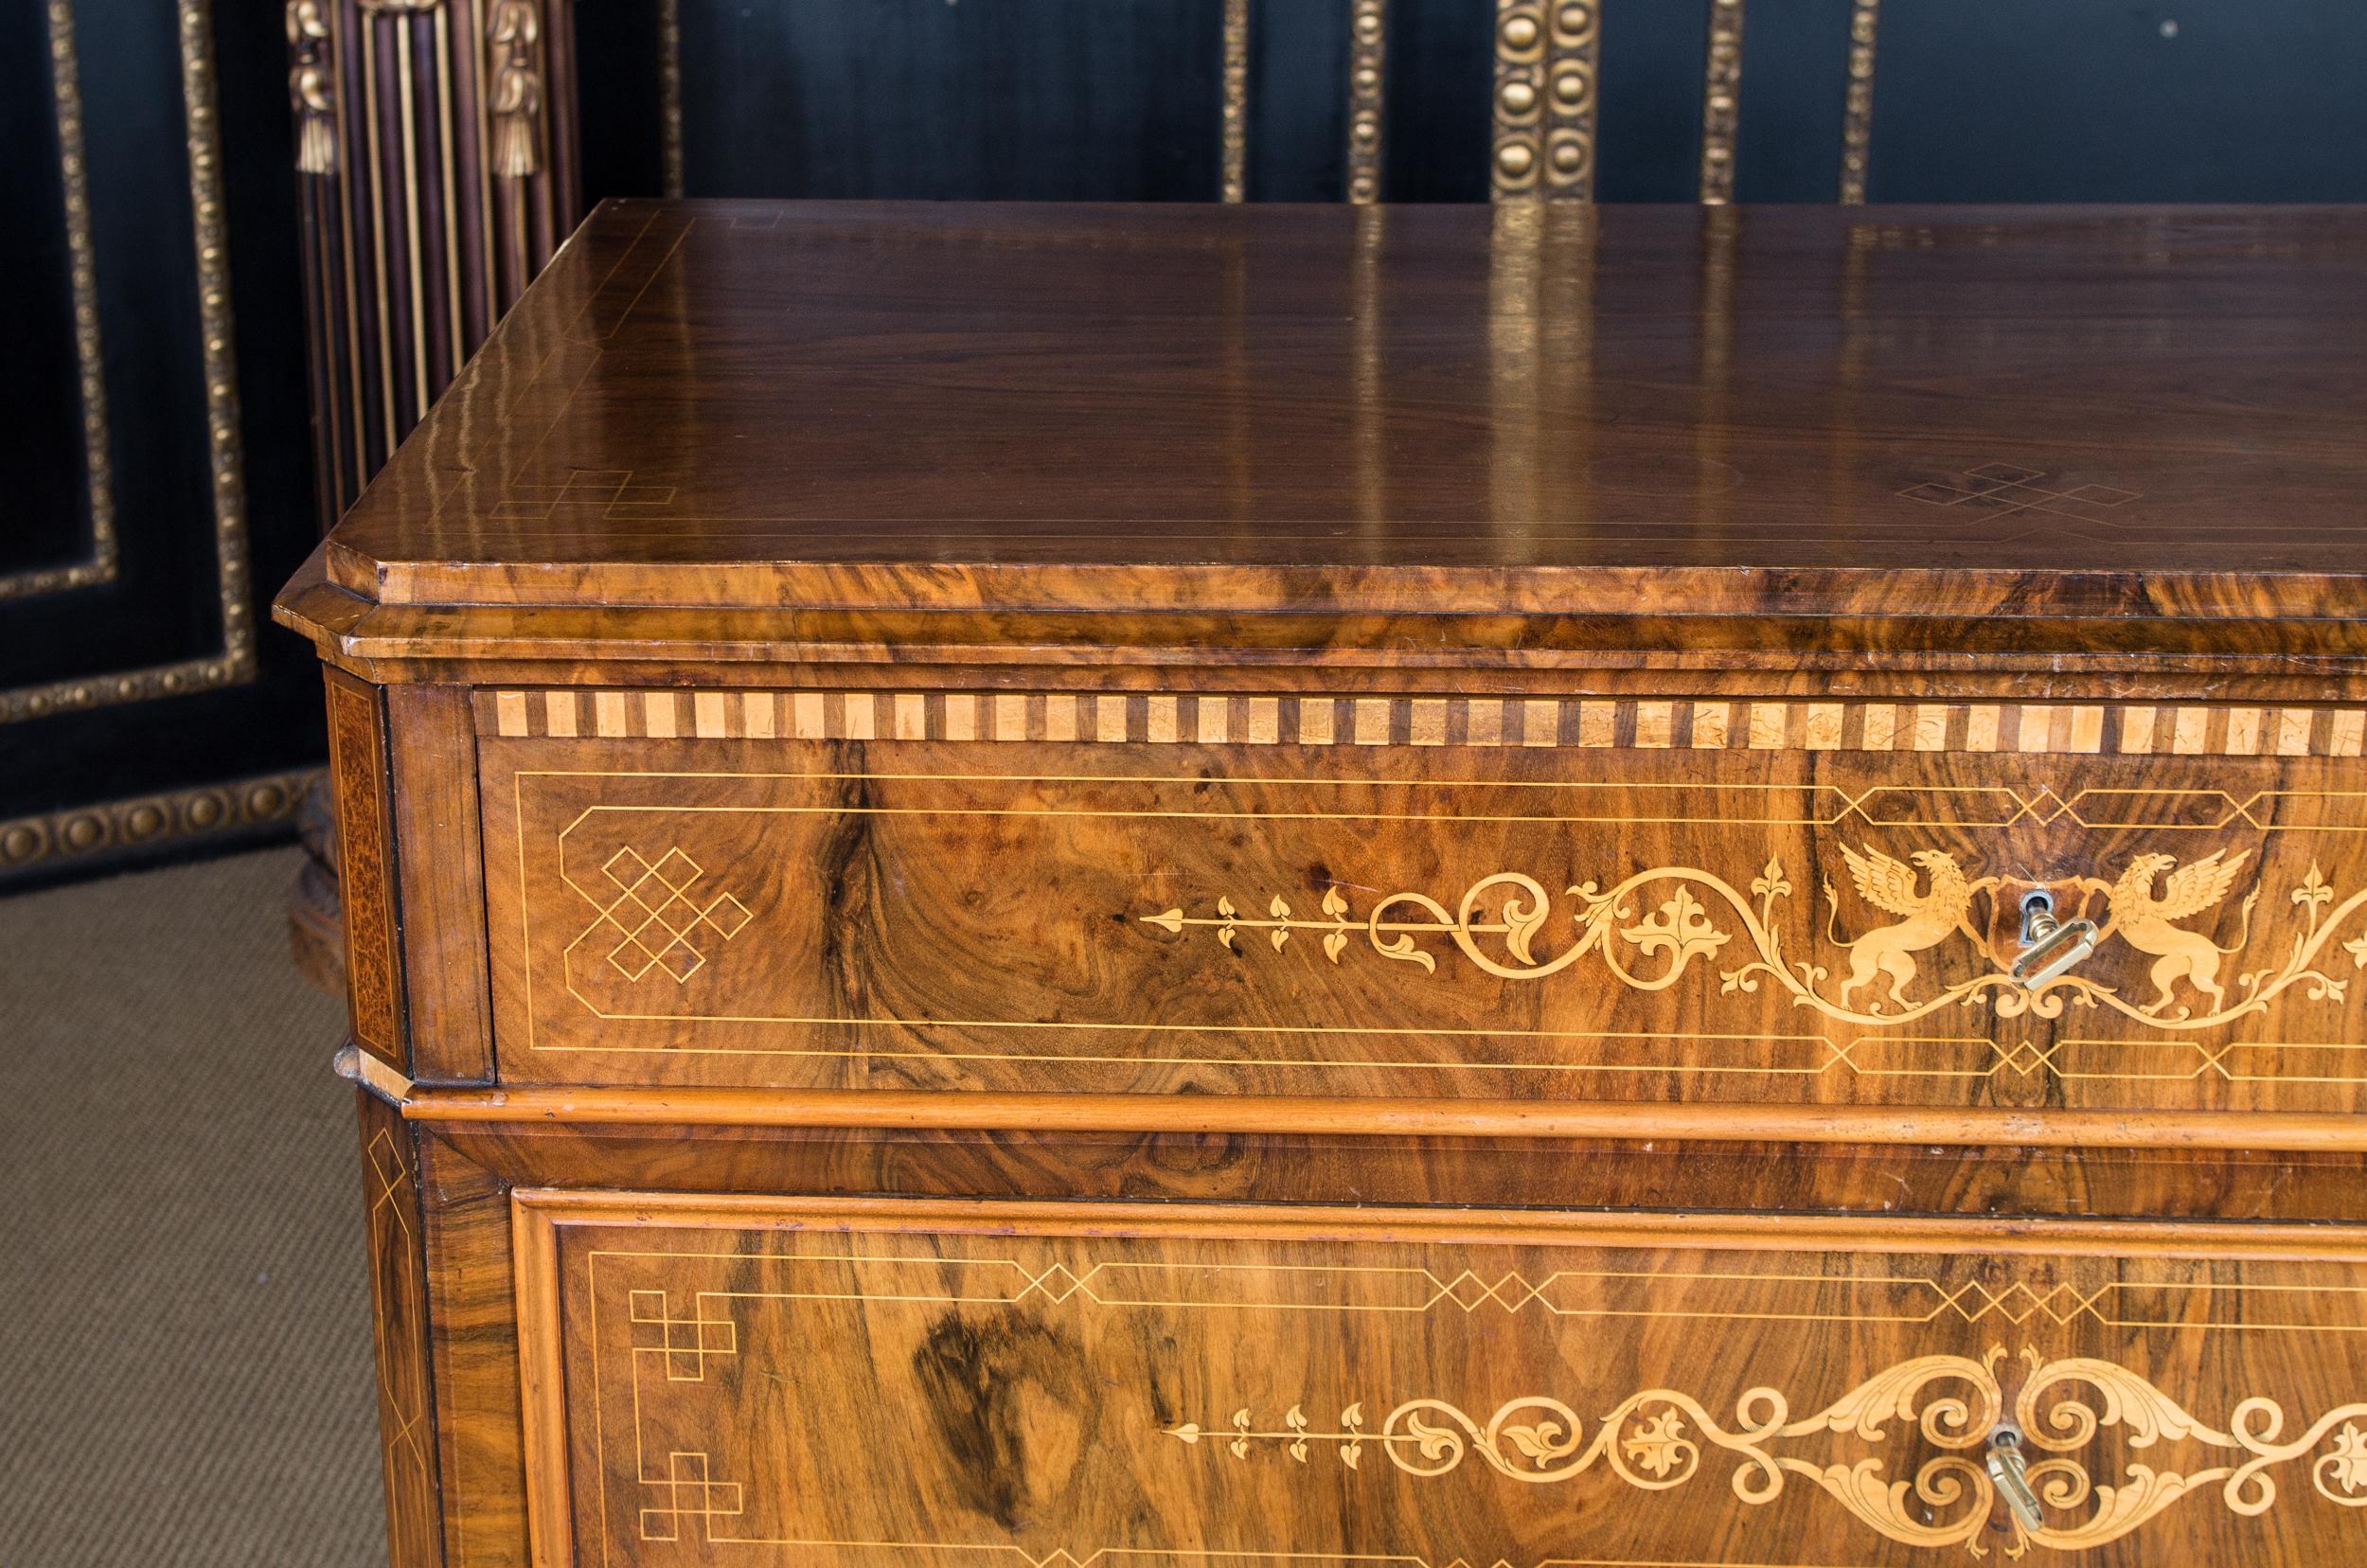 19th Century Biedermeier Writing Commode and Chest of Drawers circa 1850 with Fine Inlays